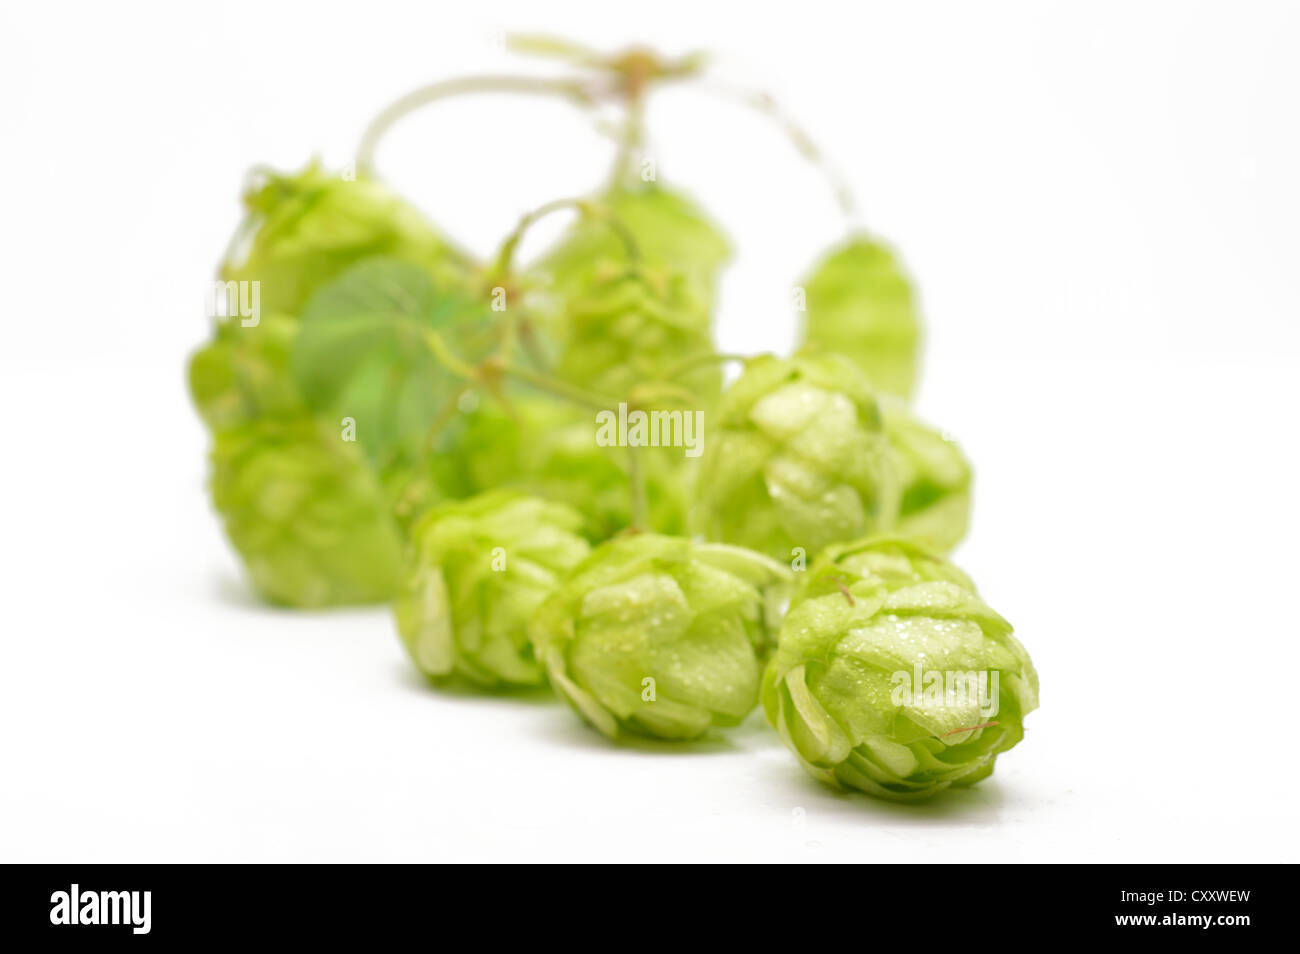 Green hop cones on a white background close-up Stock Photo